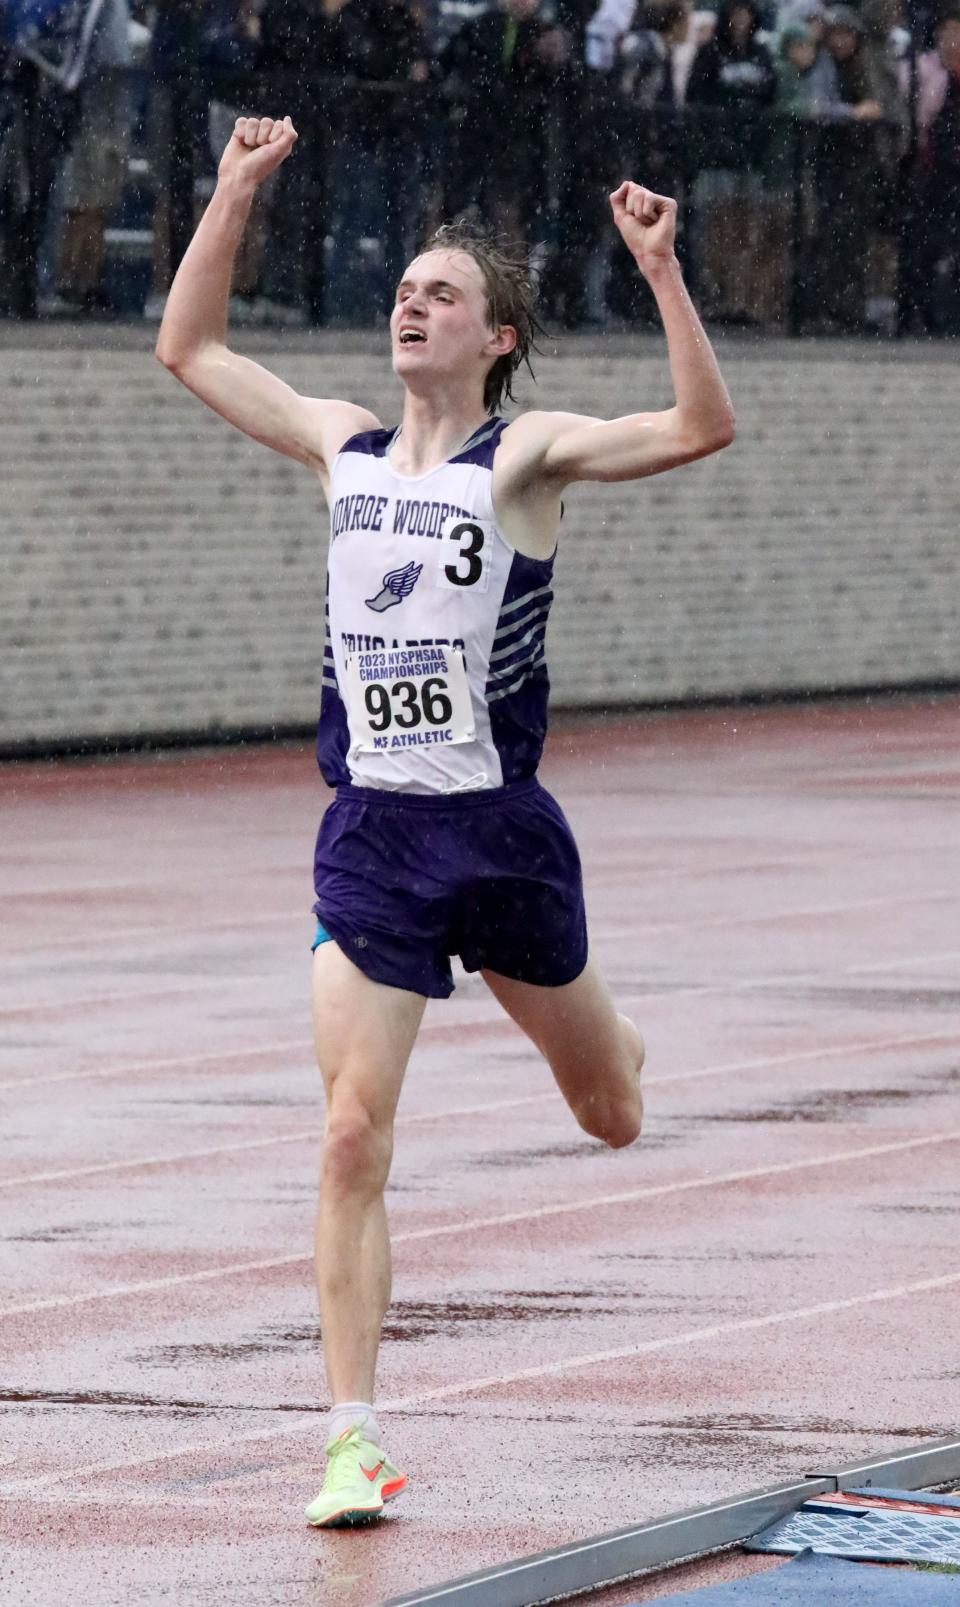 Collin Gilstrap from Monroe-Woodbury (936) crosses the finish line in the boys 3200 meter run during the New York State Track and Field Championships at Middletown High School, June 9, 2023.